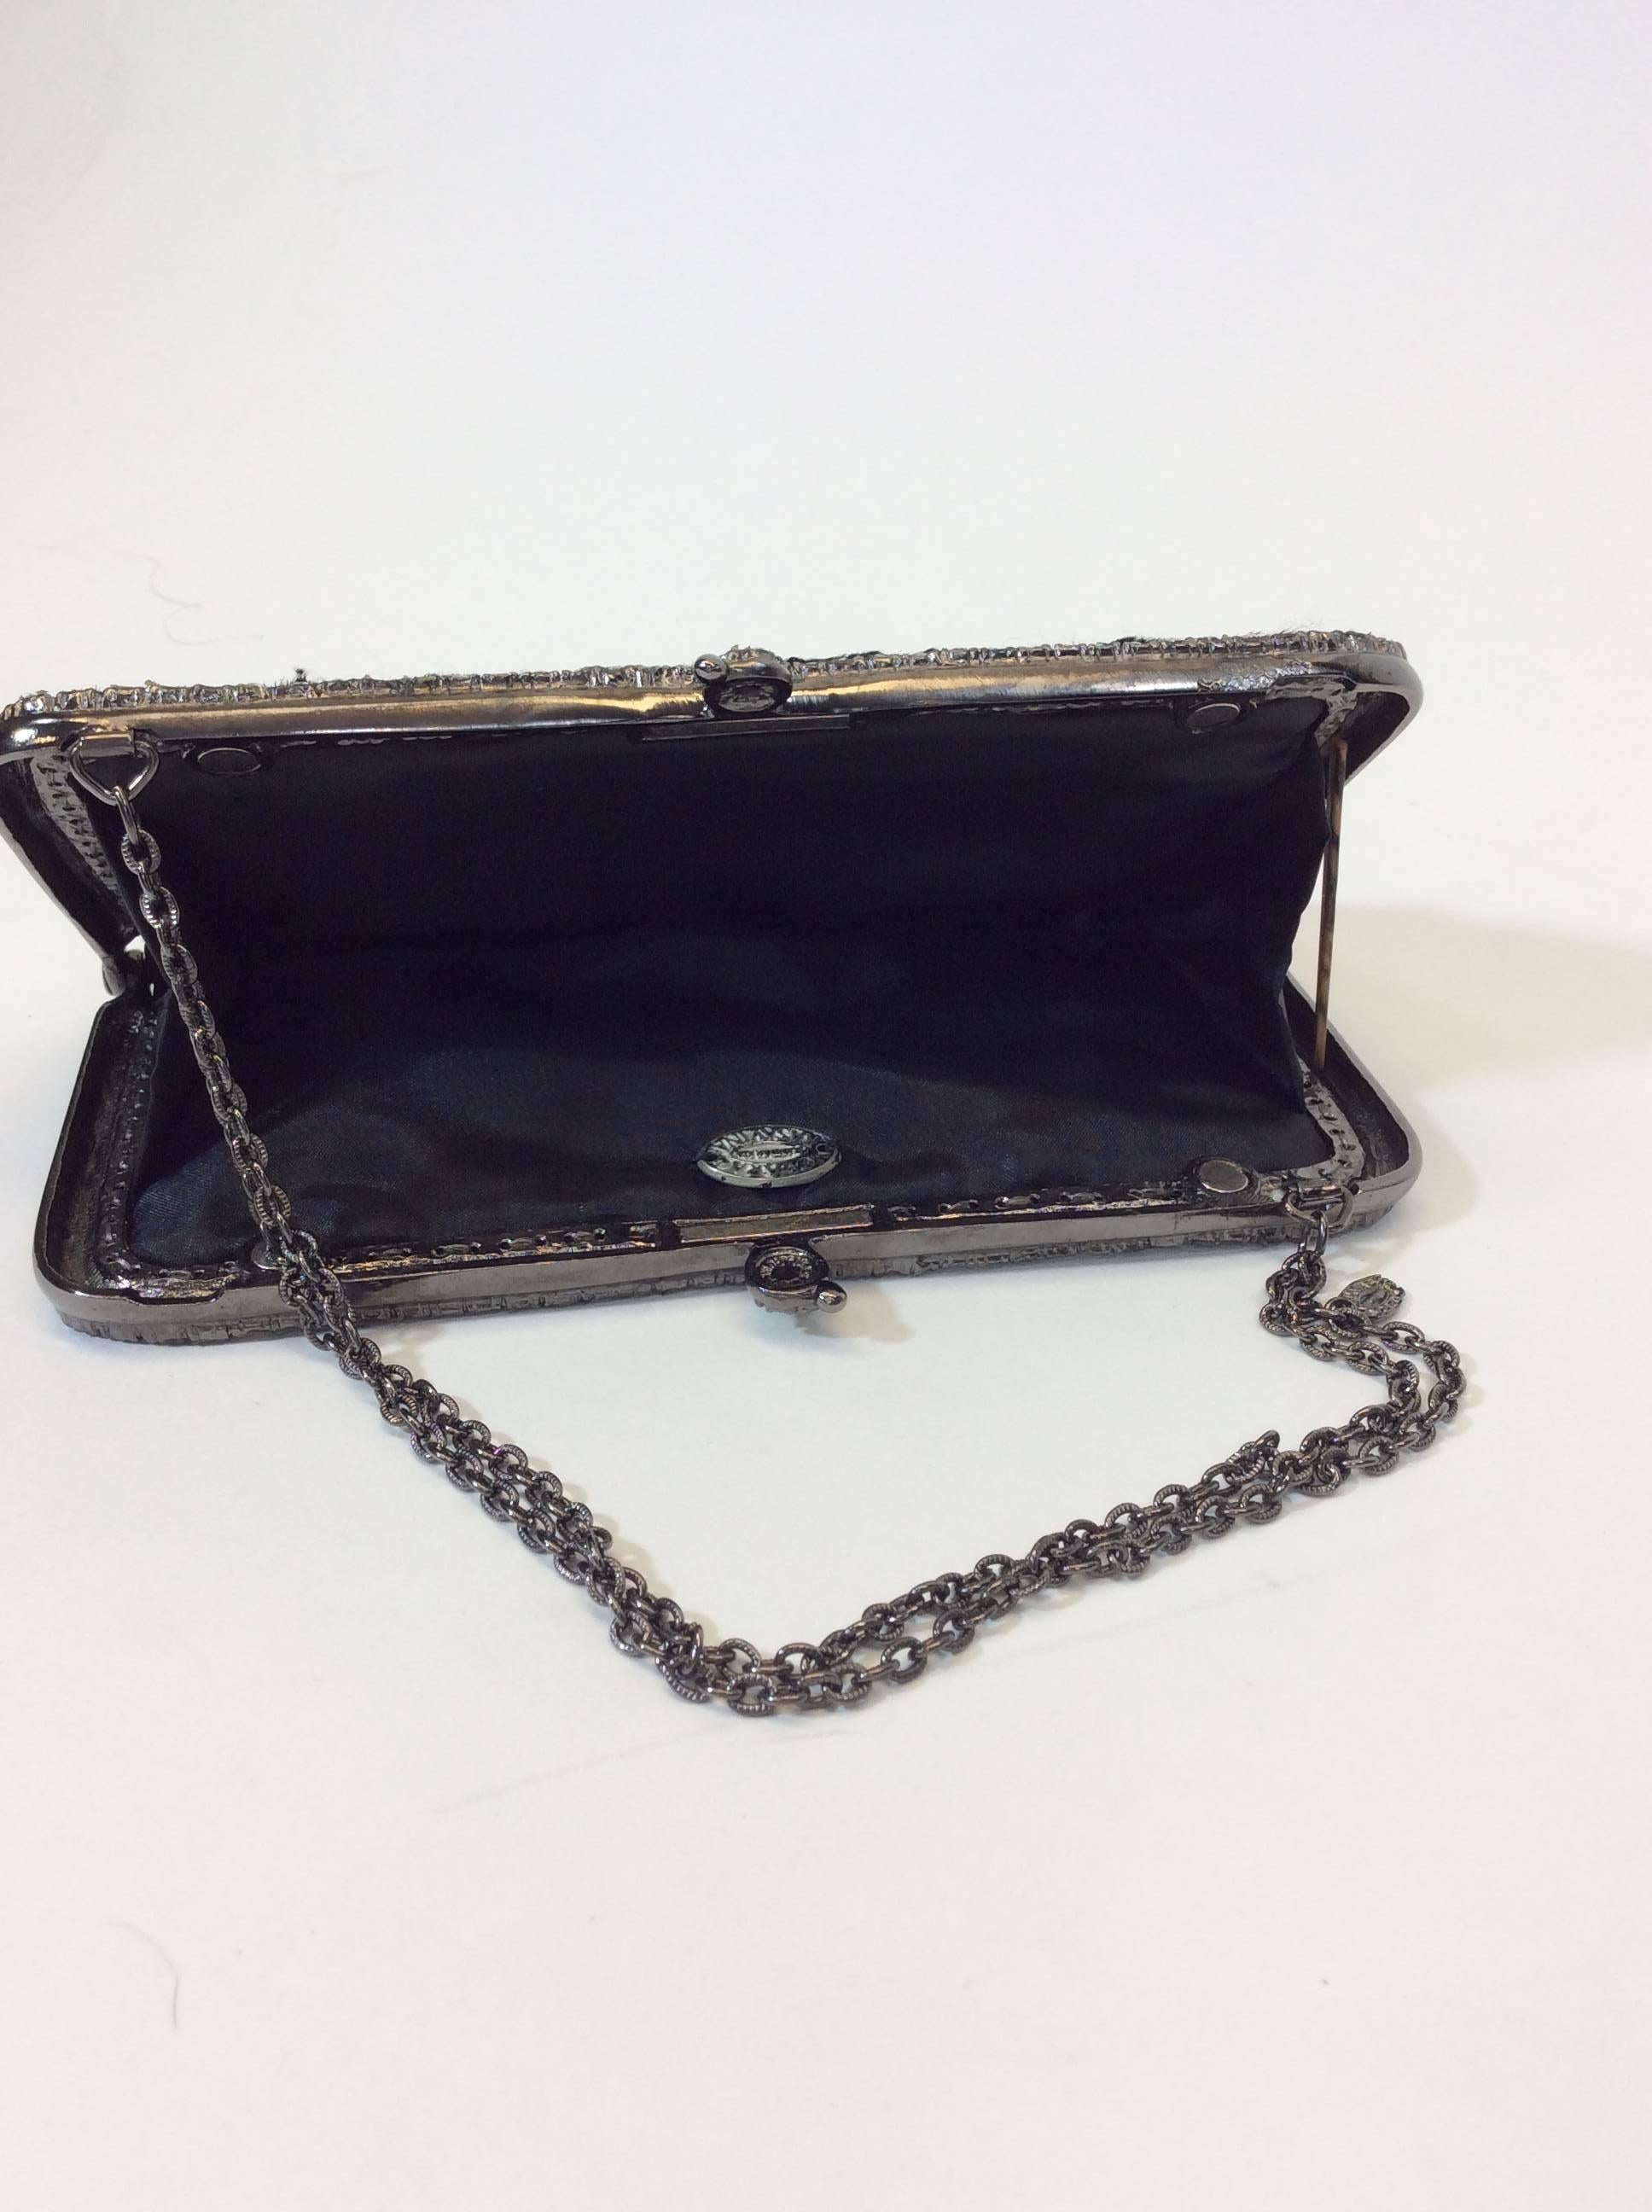 Handmade Clutch with Short Metal Chain
Soft Black Fur Exterior 
Elegant Rhinestone lined edges and Clasp 
Faux Silk Interior 
Magnetic Clasp to Close